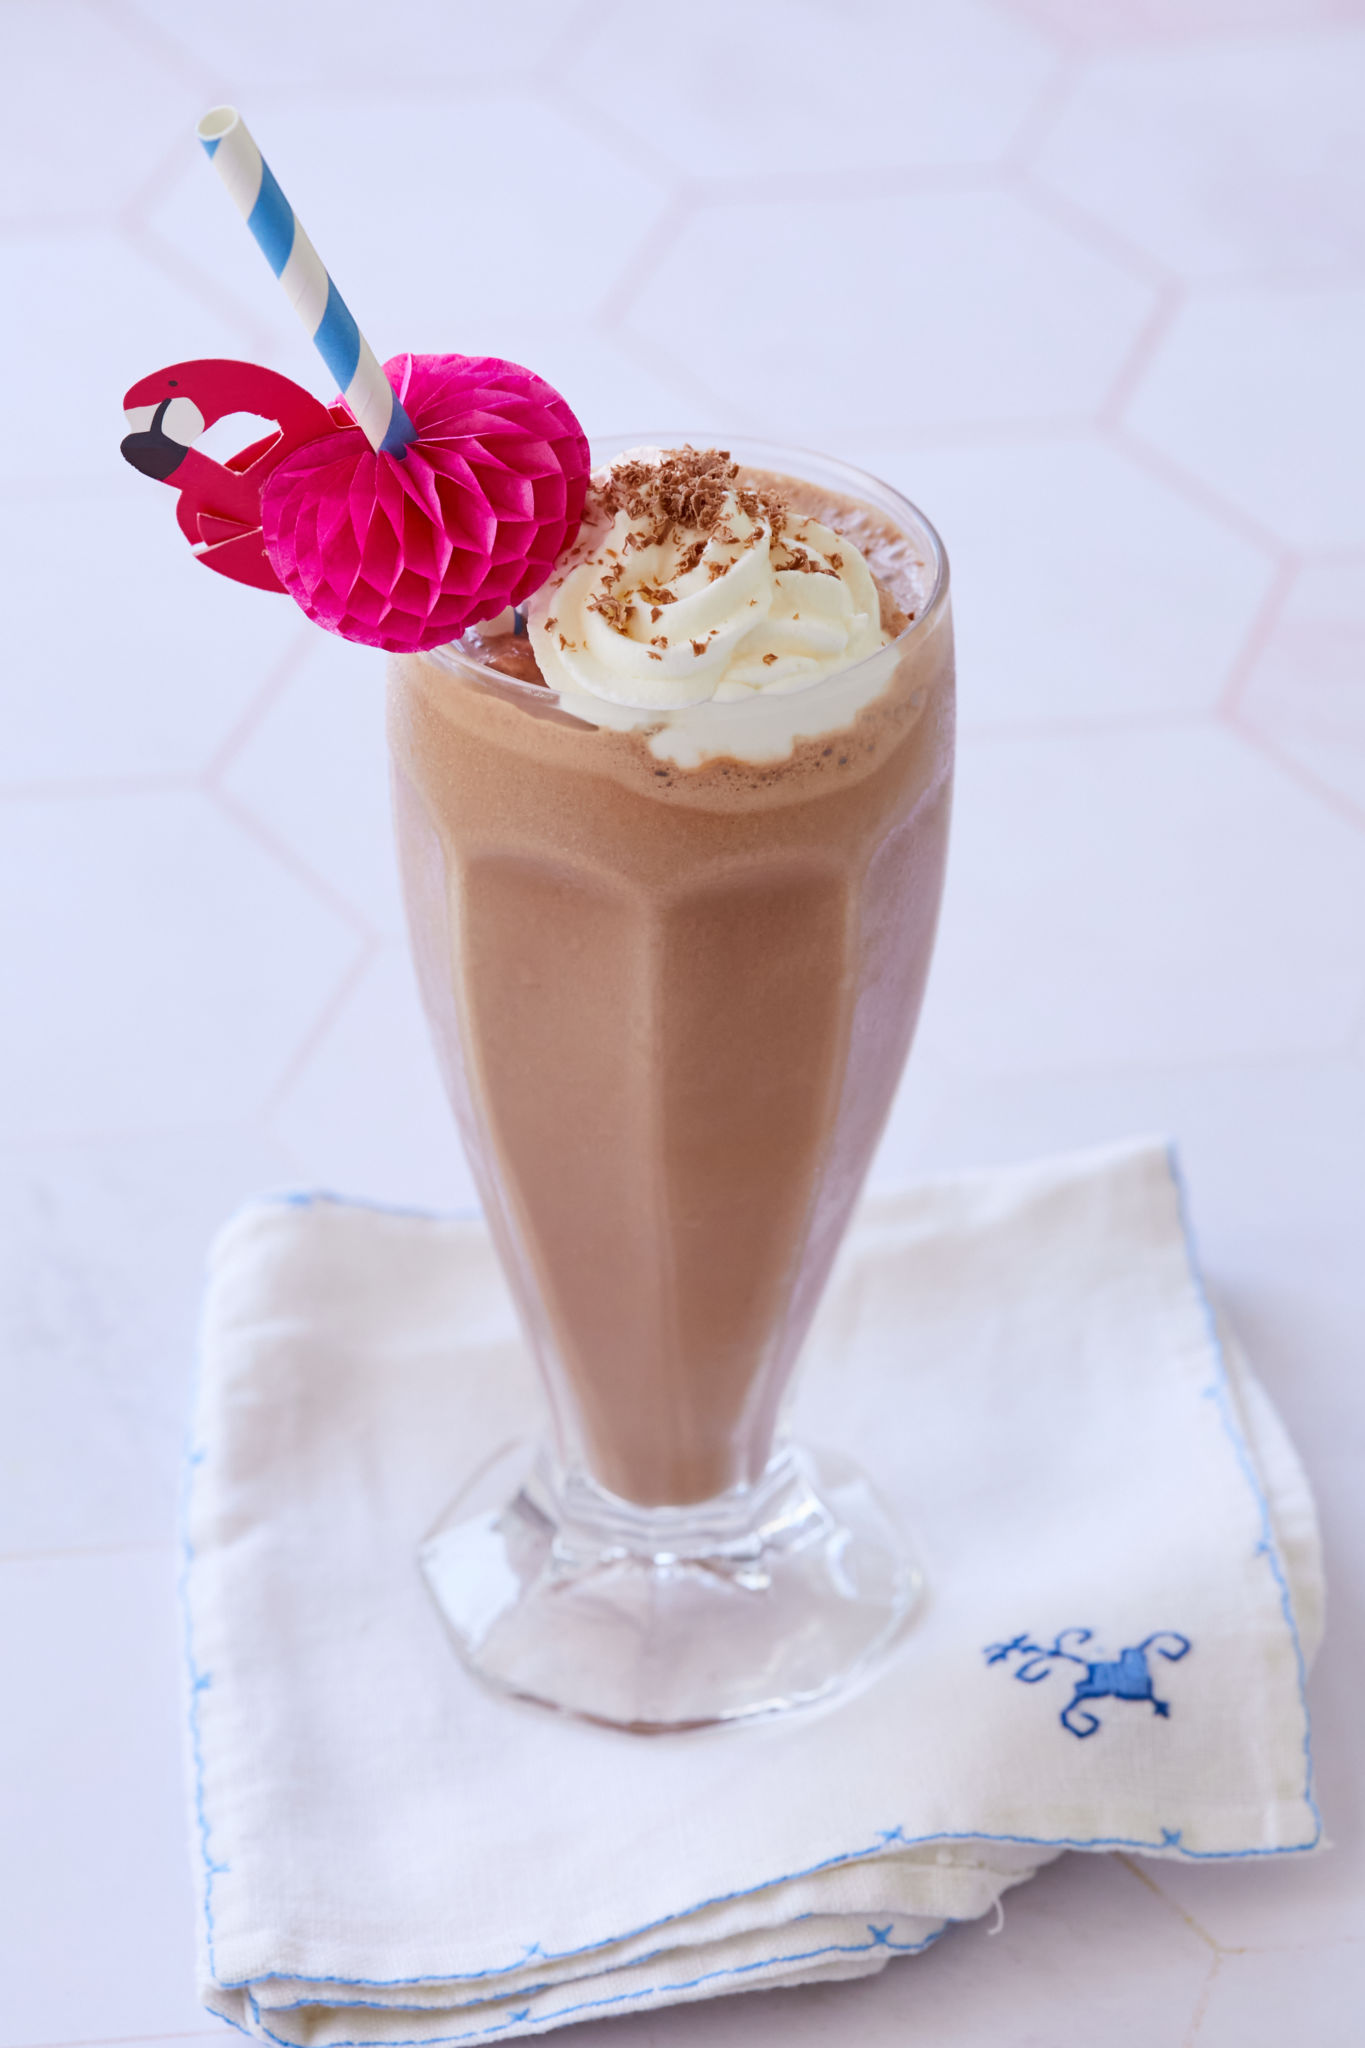 A chocolate malt milkshake is garnished with whipped cream in a tall glass with a blue and white straw and festive flamingo straw decoration.